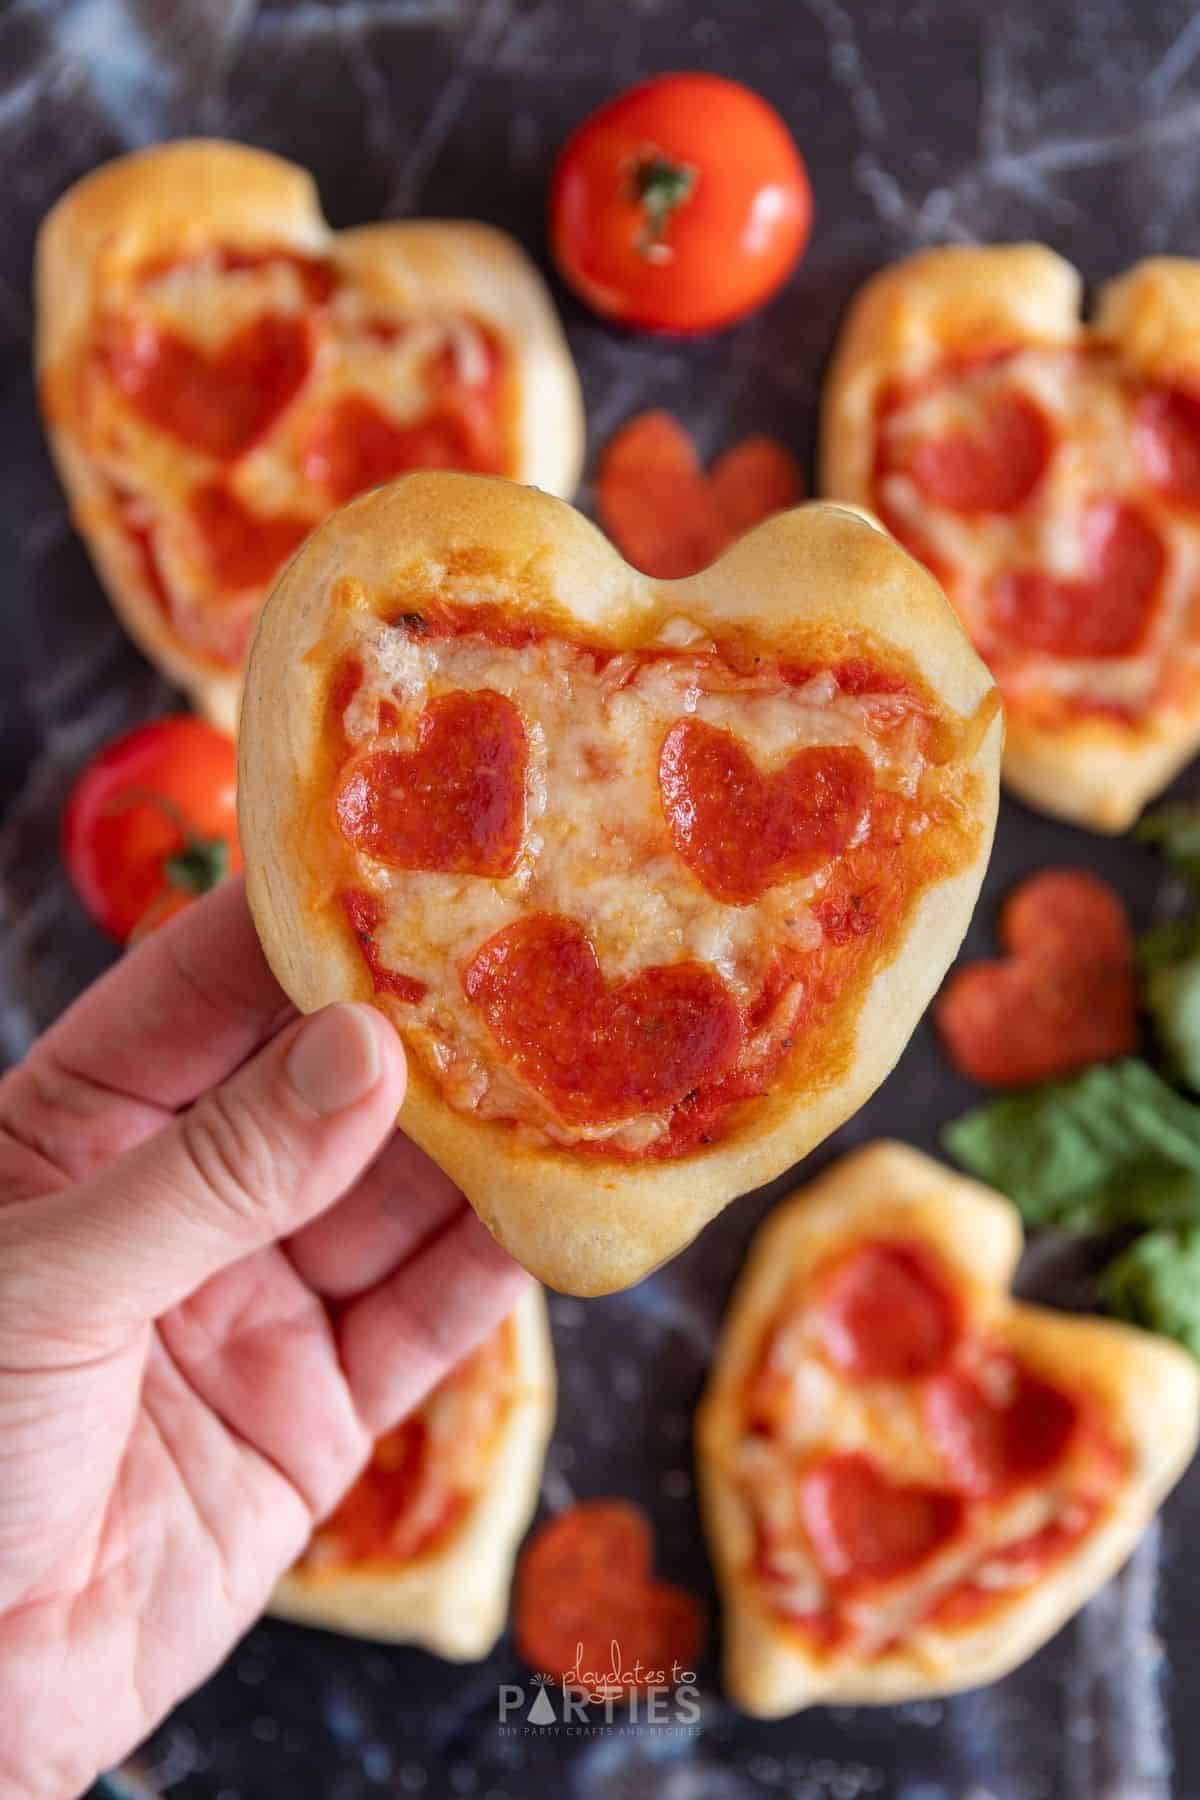 A woman's hand holding a Valentine heart shaped pizza.